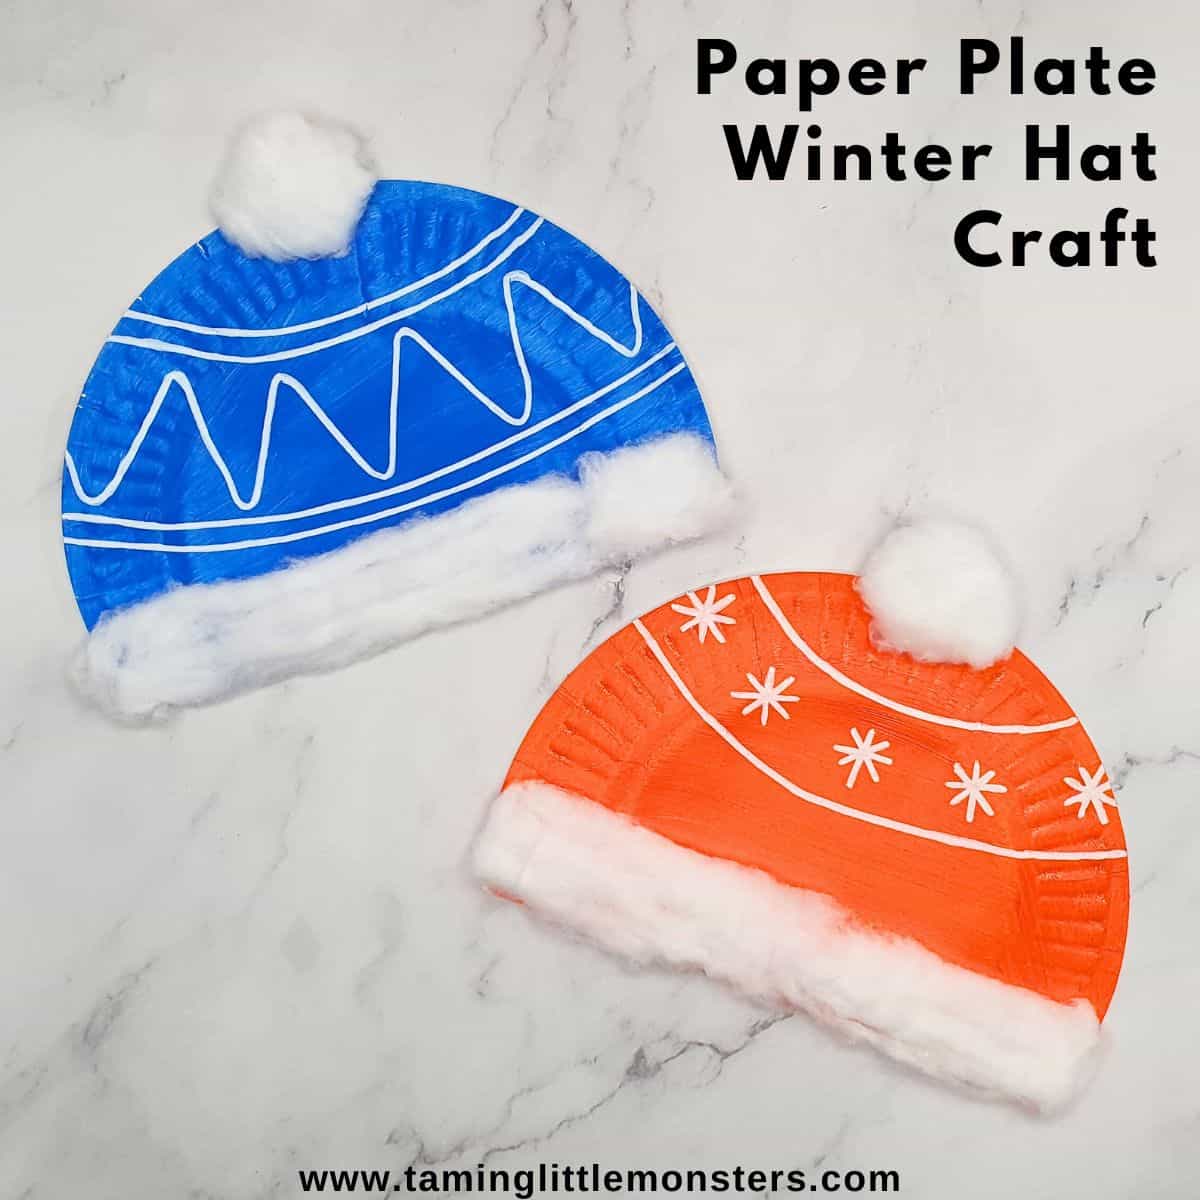 Easy and Fun Paper Plate Winter Crafts For Kids - Kids Craft Room